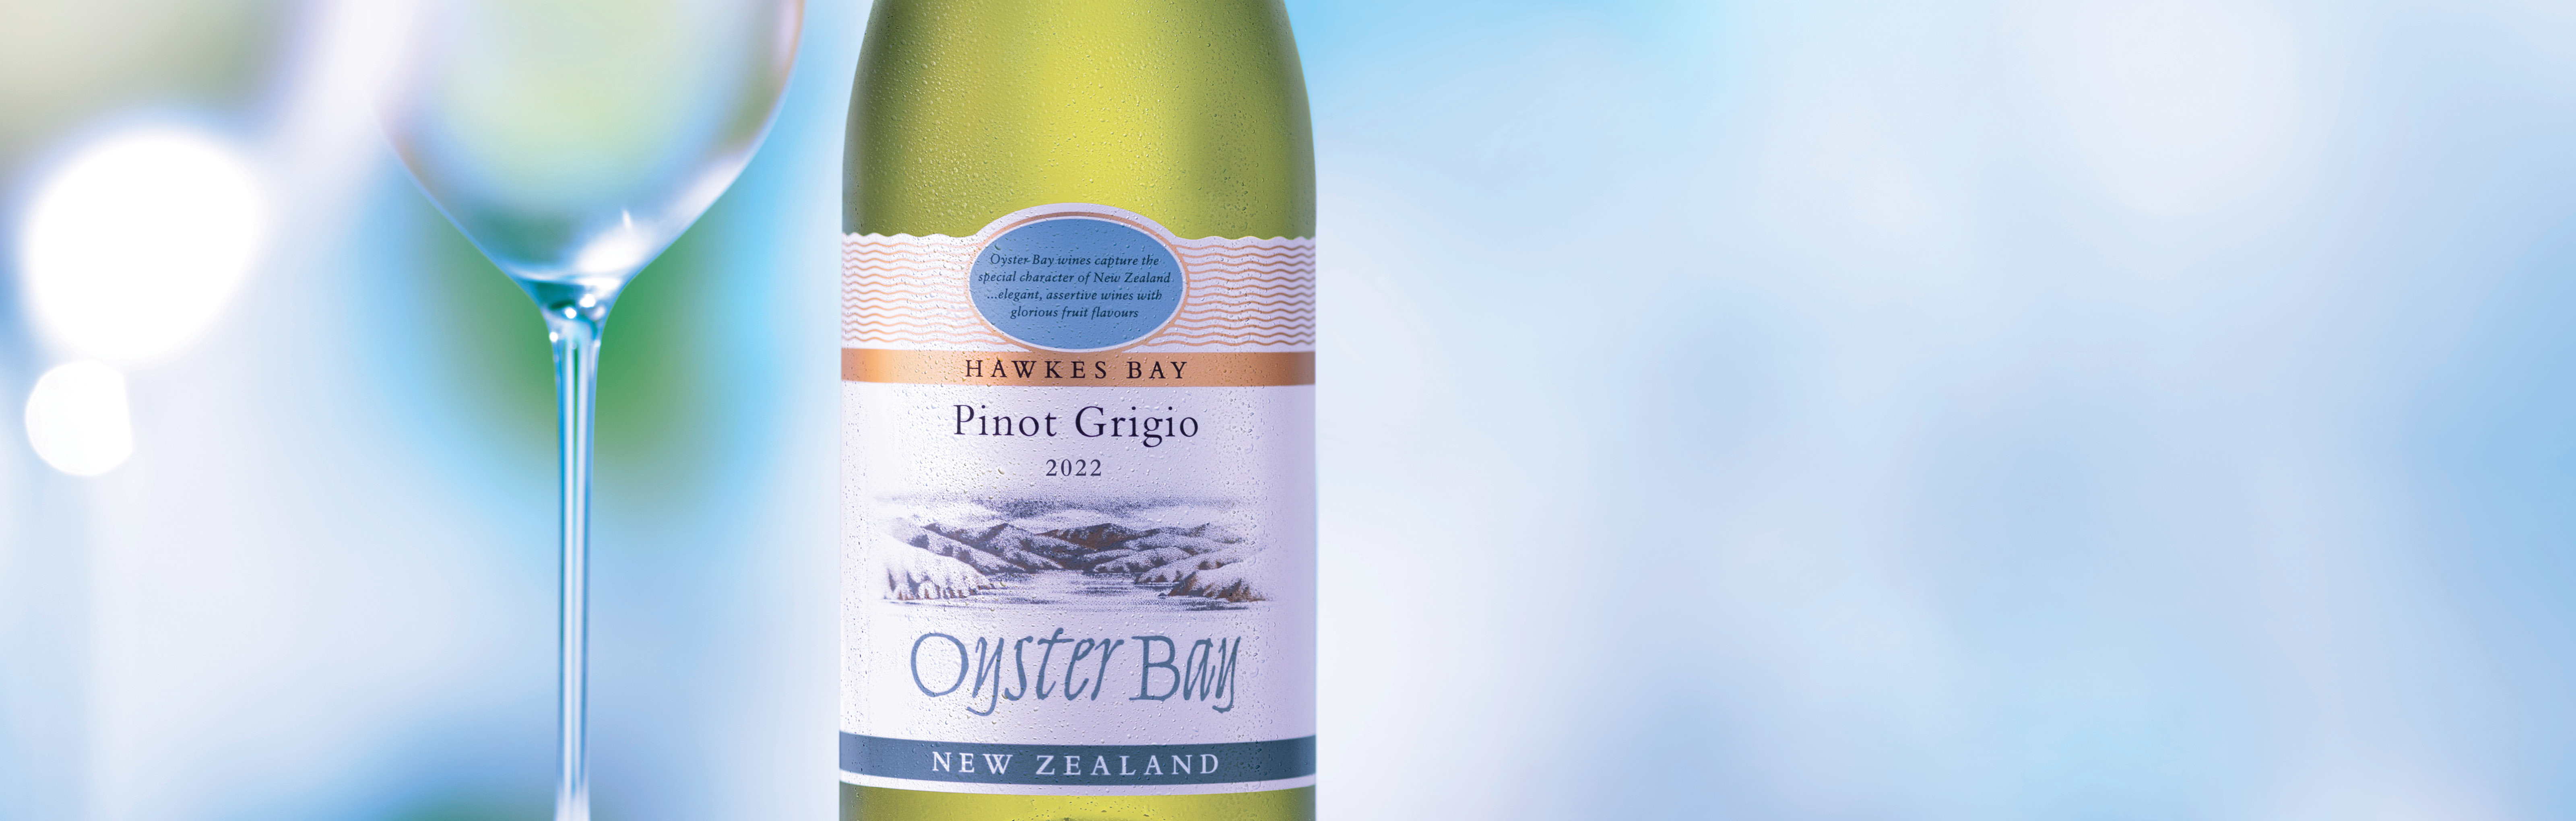 Oyster Bay Pinot Grigio bottle with two glasses